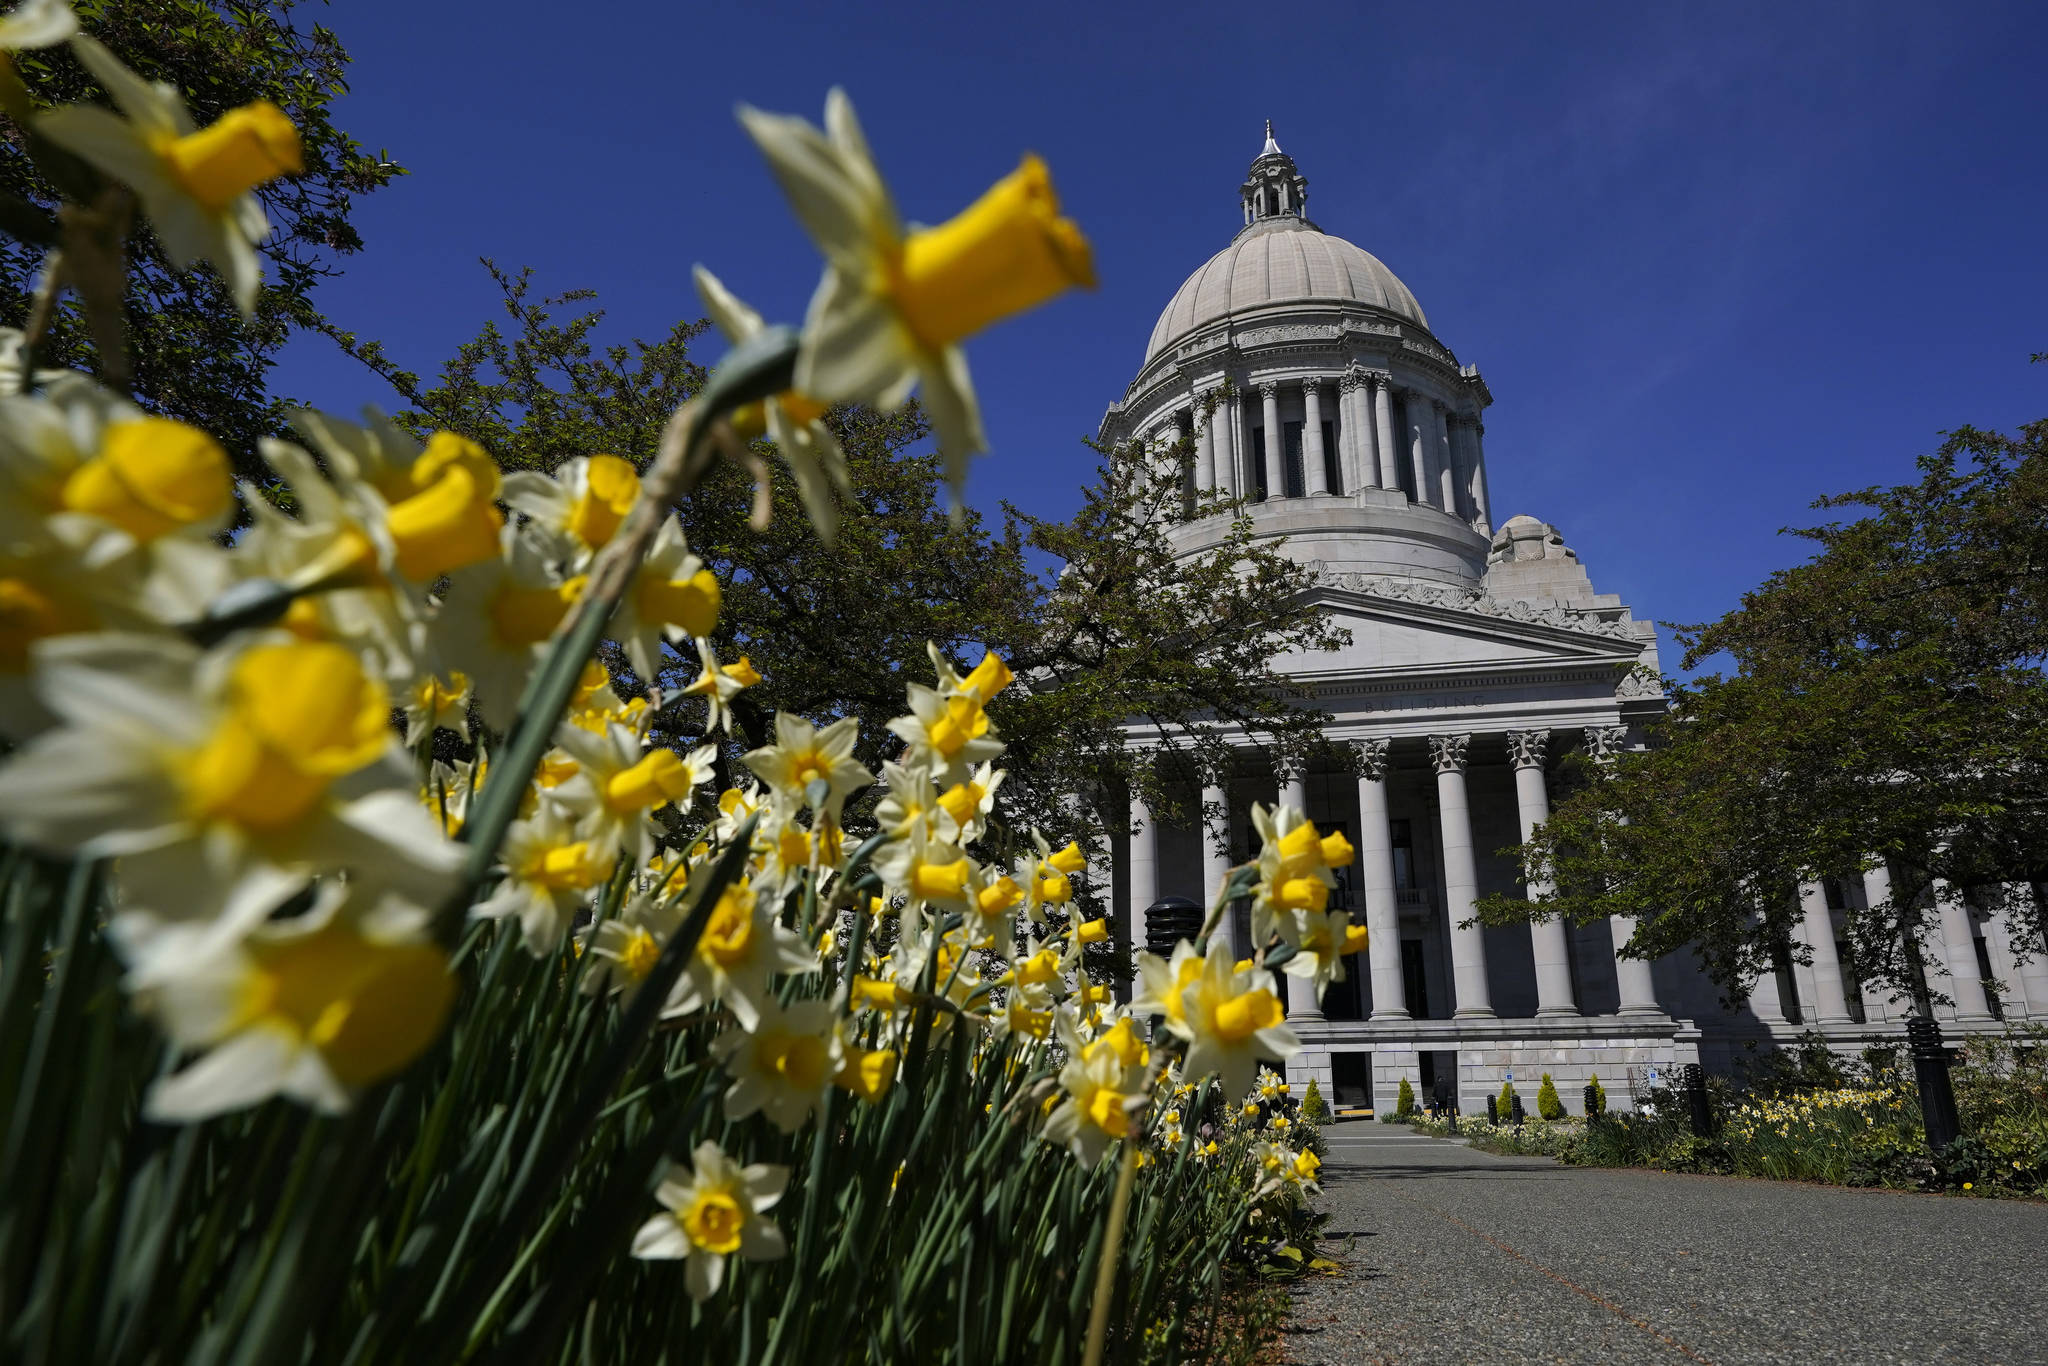 Daffodils bloom outside the Legislative Building, Wednesday, April 21, 2021, at the Capitol in Olympia, Wash. On Wednesday, lawmakers were considering a proposed new tax in Washington state on capital gains that would be imposed on the sale of stocks and bonds in excess of $250,000. (AP Photo/Ted S. Warren)